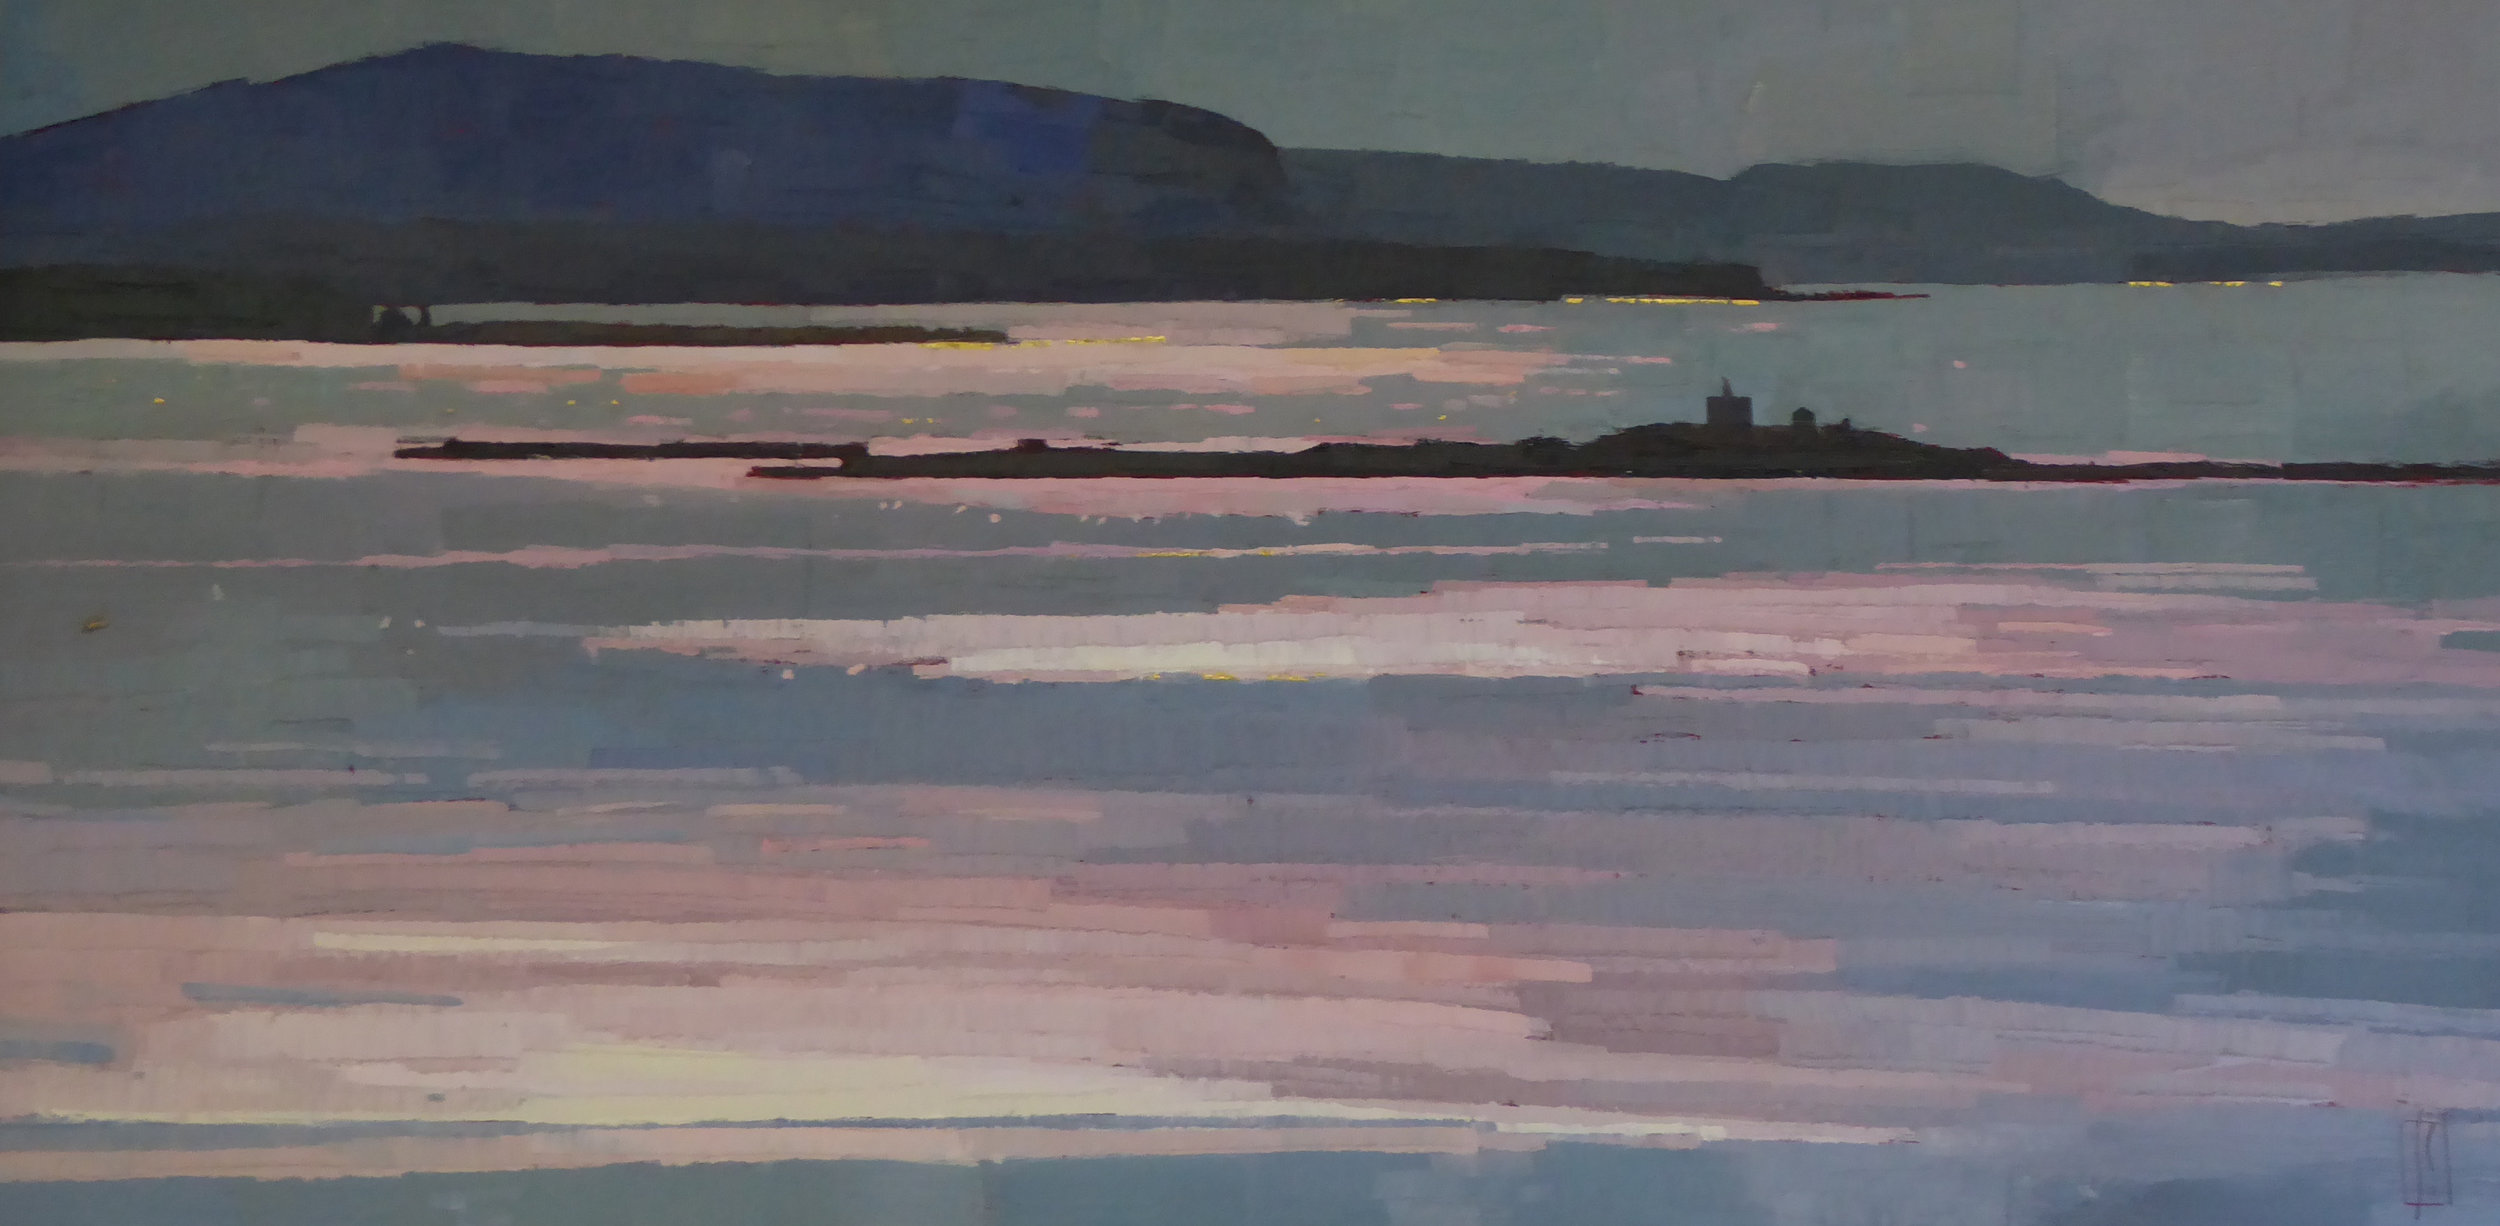   Ocean in Pink Light  12 x 24 oil &amp; gold on cradled wood panel   sold    Islesford Artists  